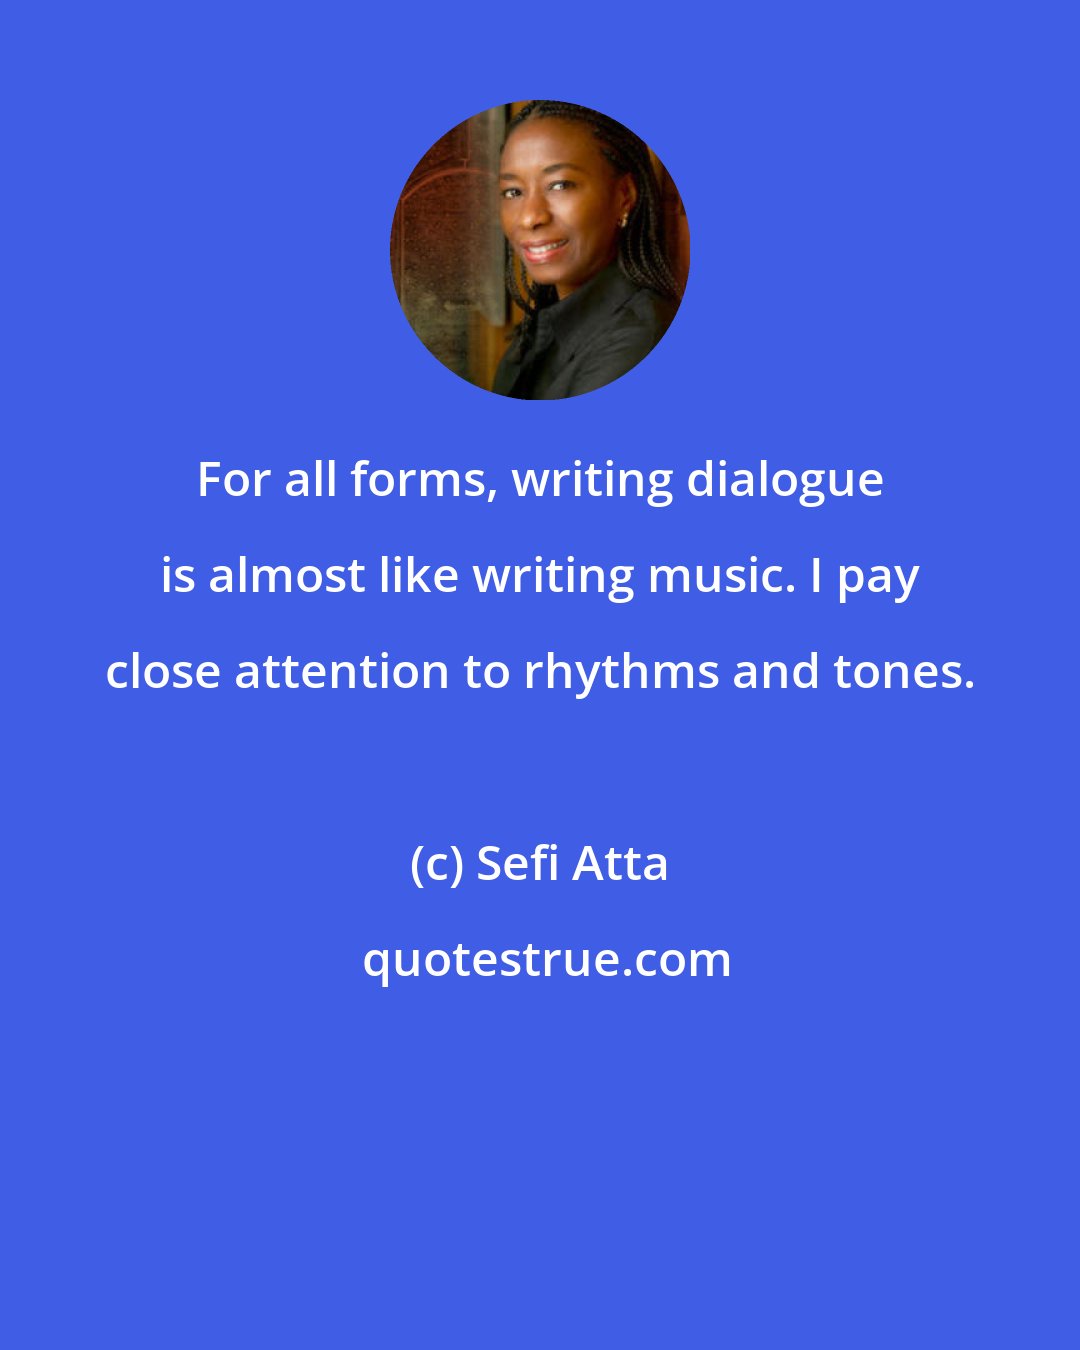 Sefi Atta: For all forms, writing dialogue is almost like writing music. I pay close attention to rhythms and tones.